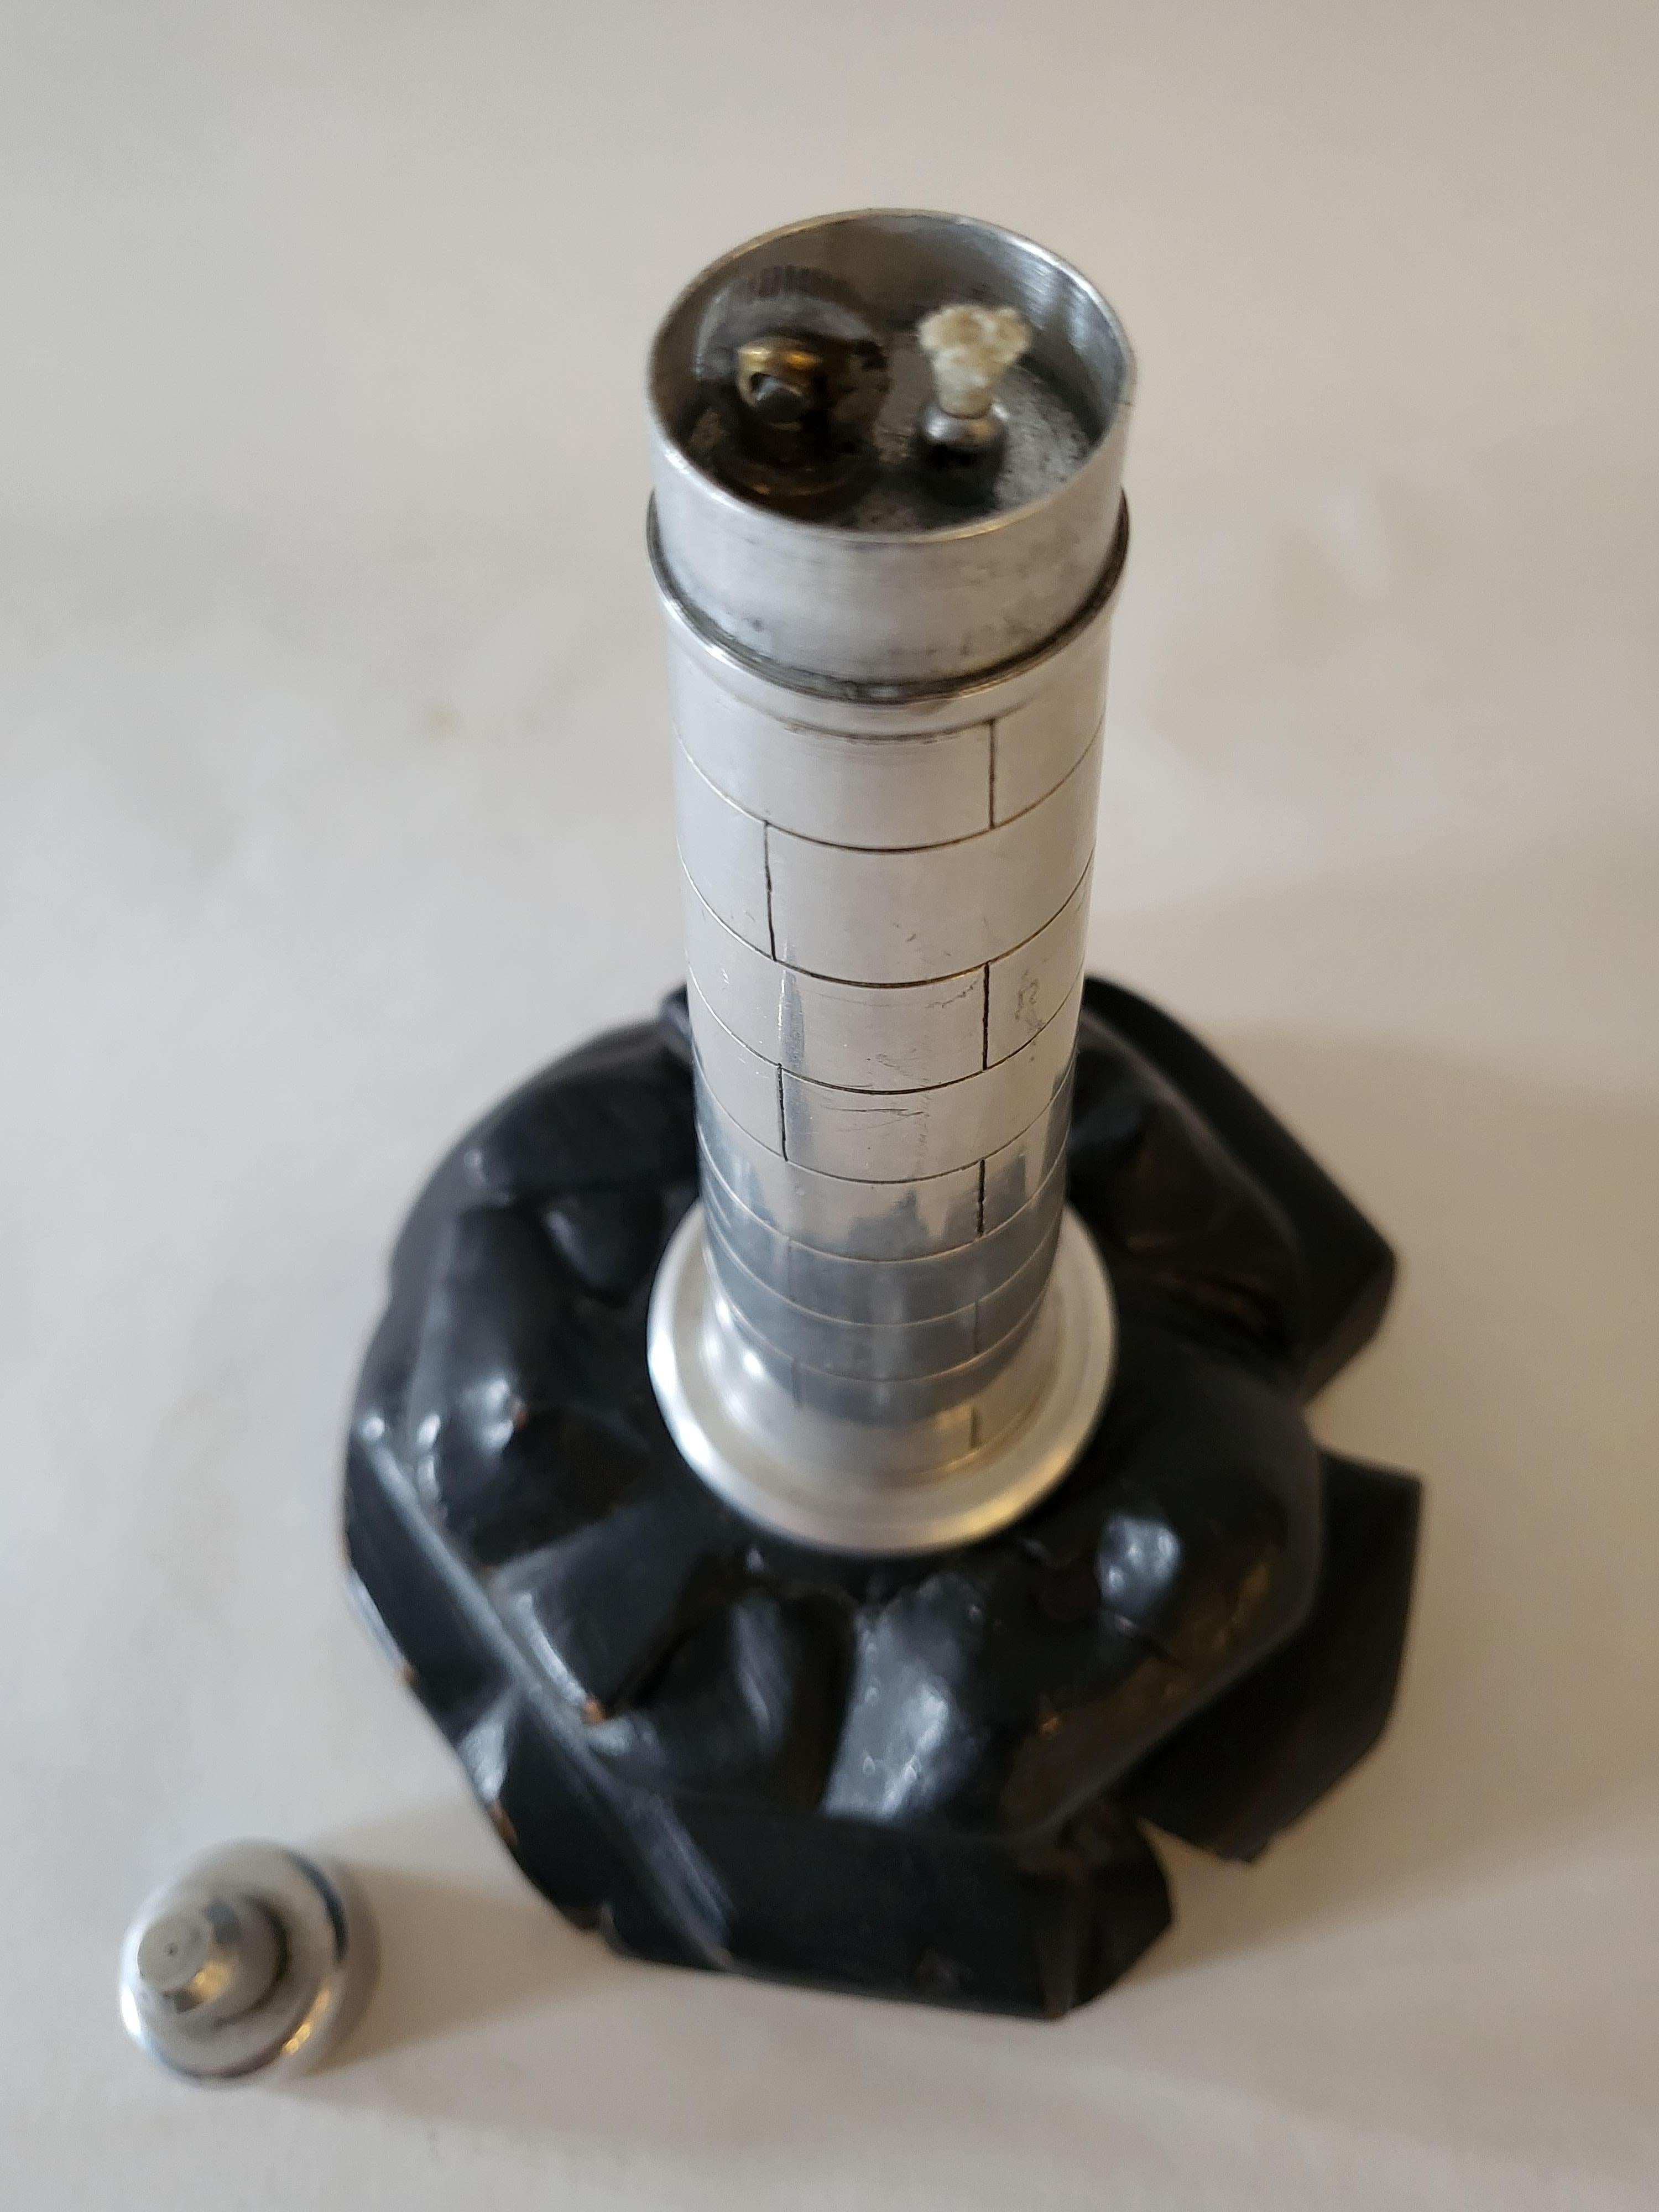 We have listed this wonderful hand made English figurative table lighter as being Trench Art but it was most likely crafted by a tool and die worker in one of the wartime aircraft factories. It features a solid aluminum bodied model of a lighthouse,